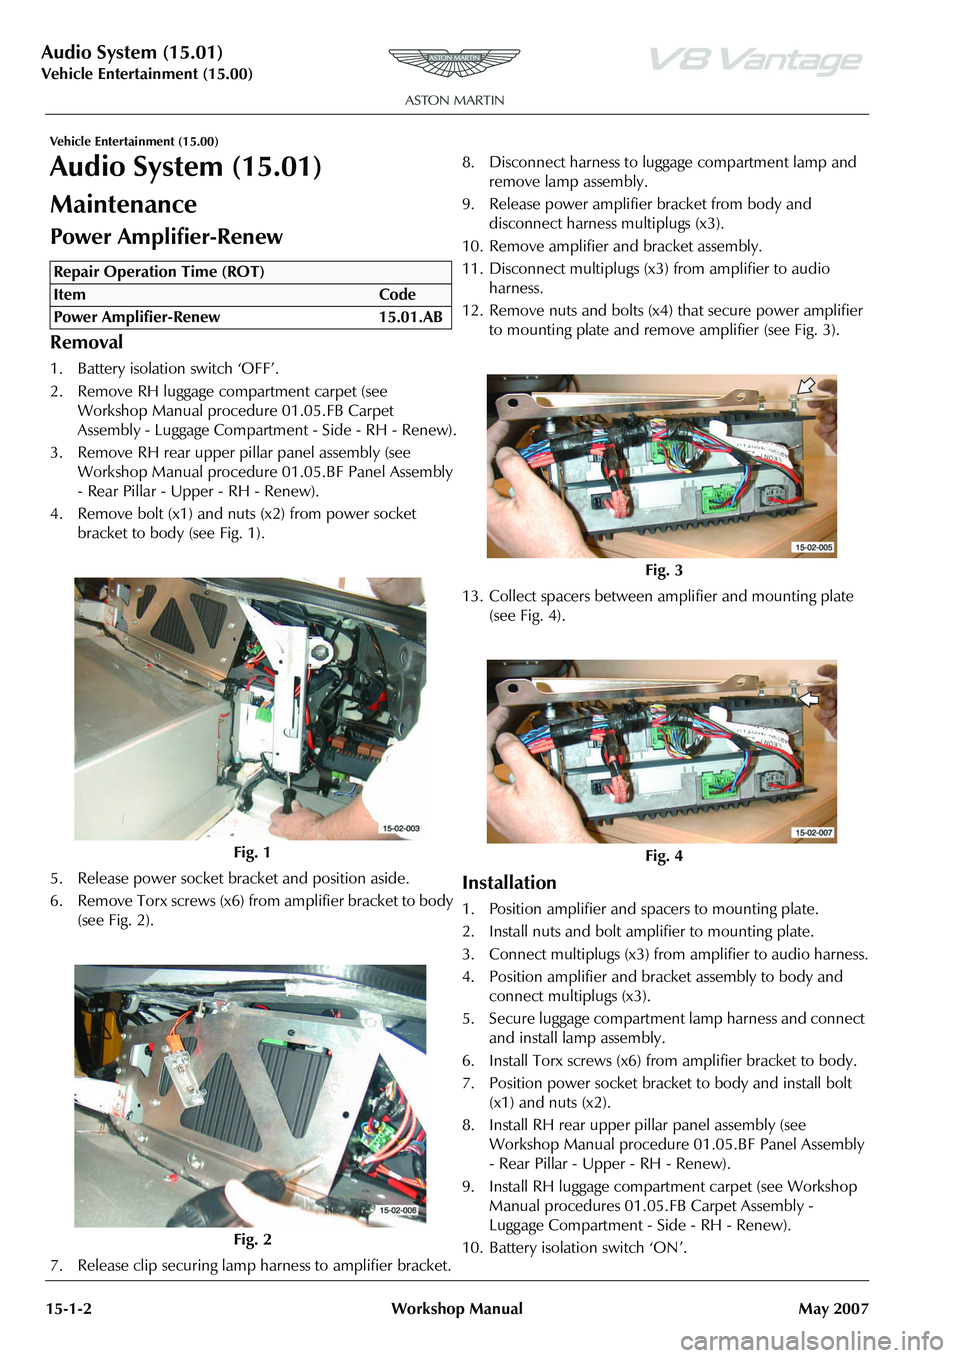 ASTON MARTIN V8 VANTAGE 2010  Workshop Manual Audio System (15.01)
Vehicle Entertainment (15.00)15-1-2 Workshop Manual May 2007
Vehicle Entertainment (15.00)
Audio System (15.01)
Maintenance
Power Amplifier-Renew
Removal
1. Battery isolation swit